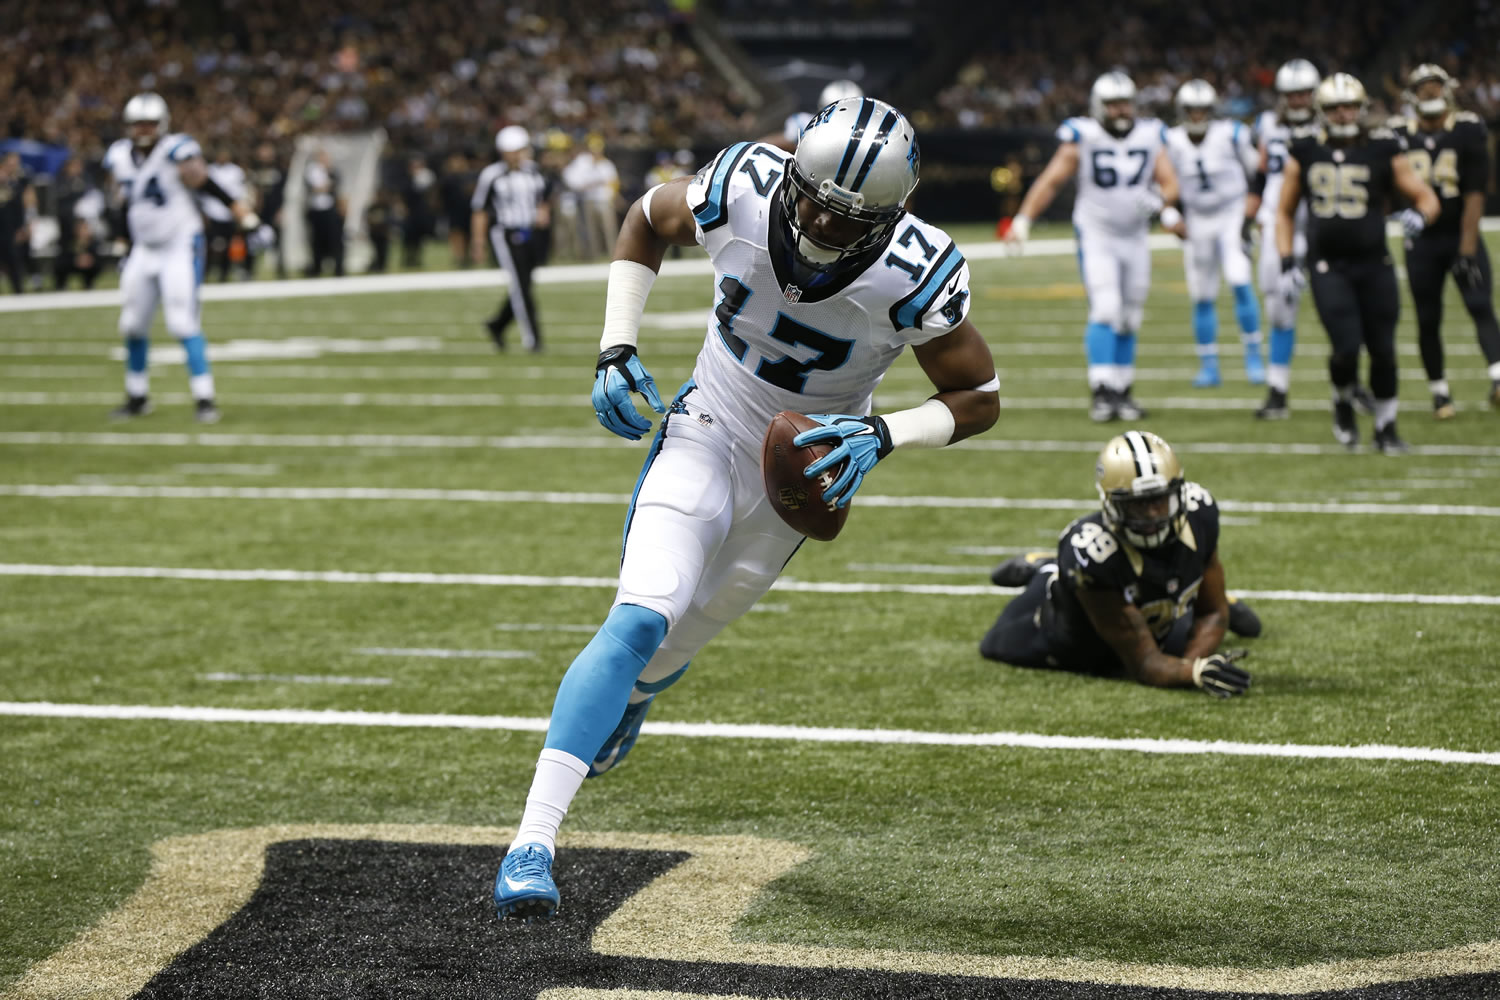 Carolina Panthers wide receiver Devin Funchess (17) touchdown in front of New Orleans Saints cornerback Brandon Browner (39) in the second half of an NFL football game in New Orleans, Sunday, Dec. 6, 2015.